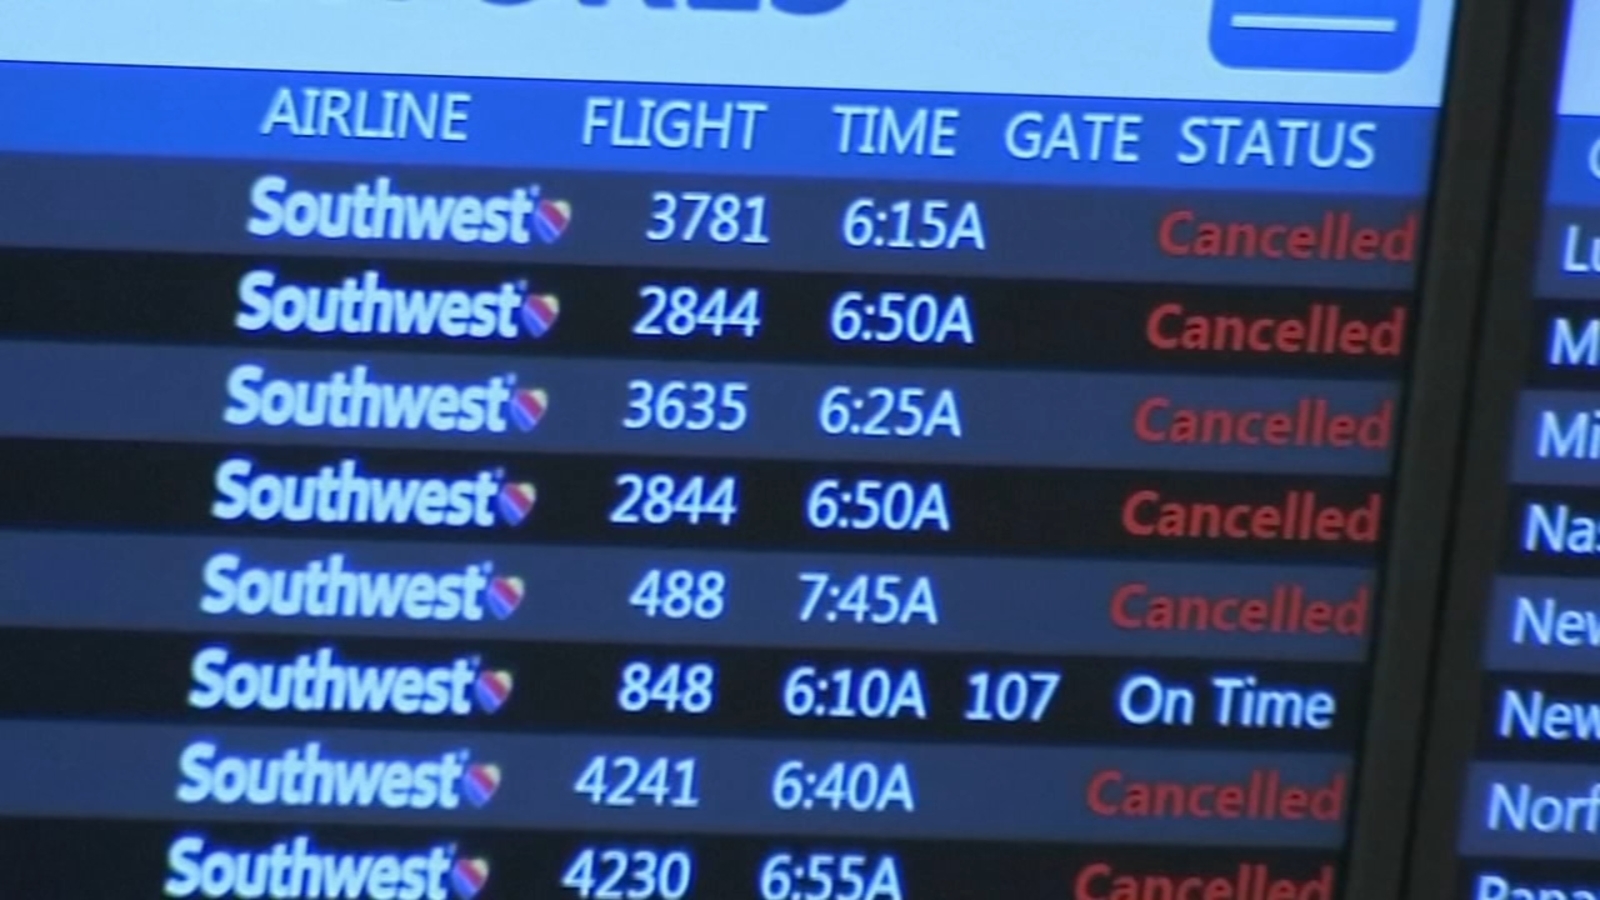 About 2500 Flights Were Cancelled By The Airline